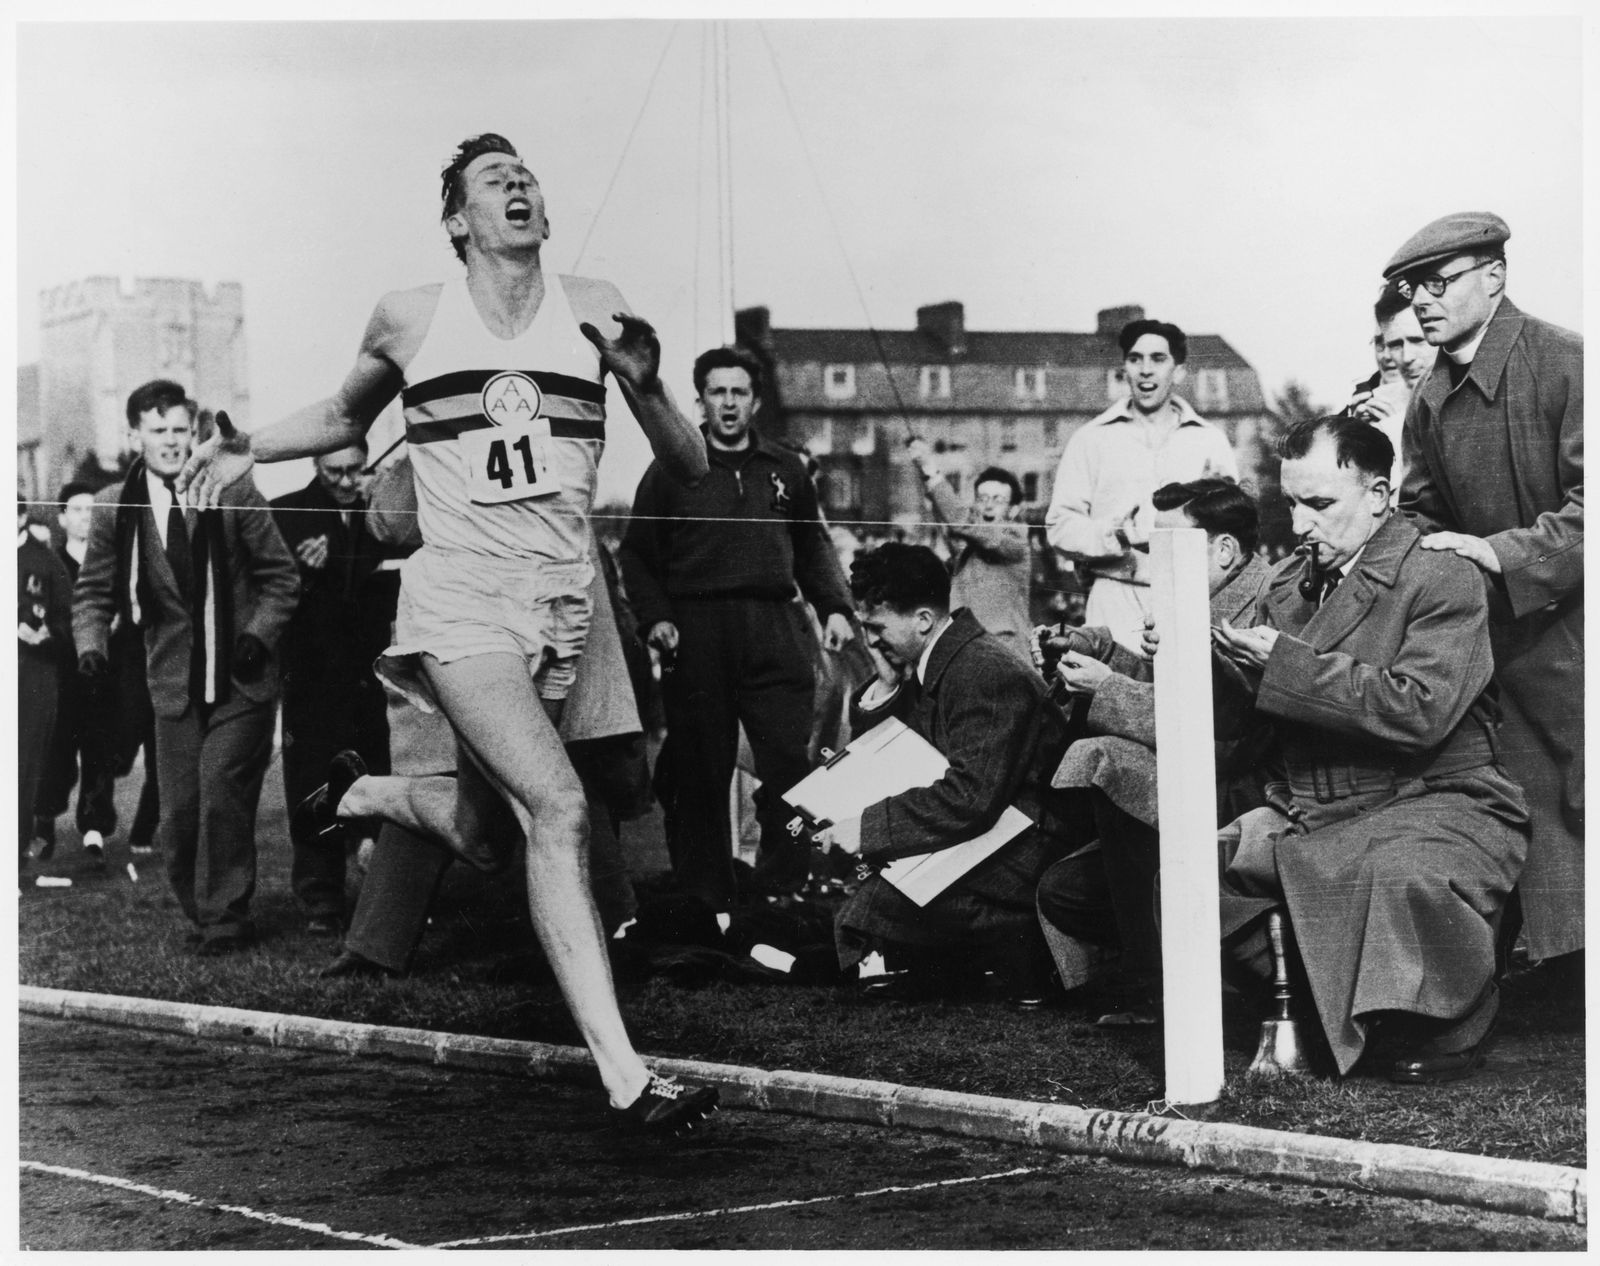 Five Things to Know About Roger Bannister, the First Person to